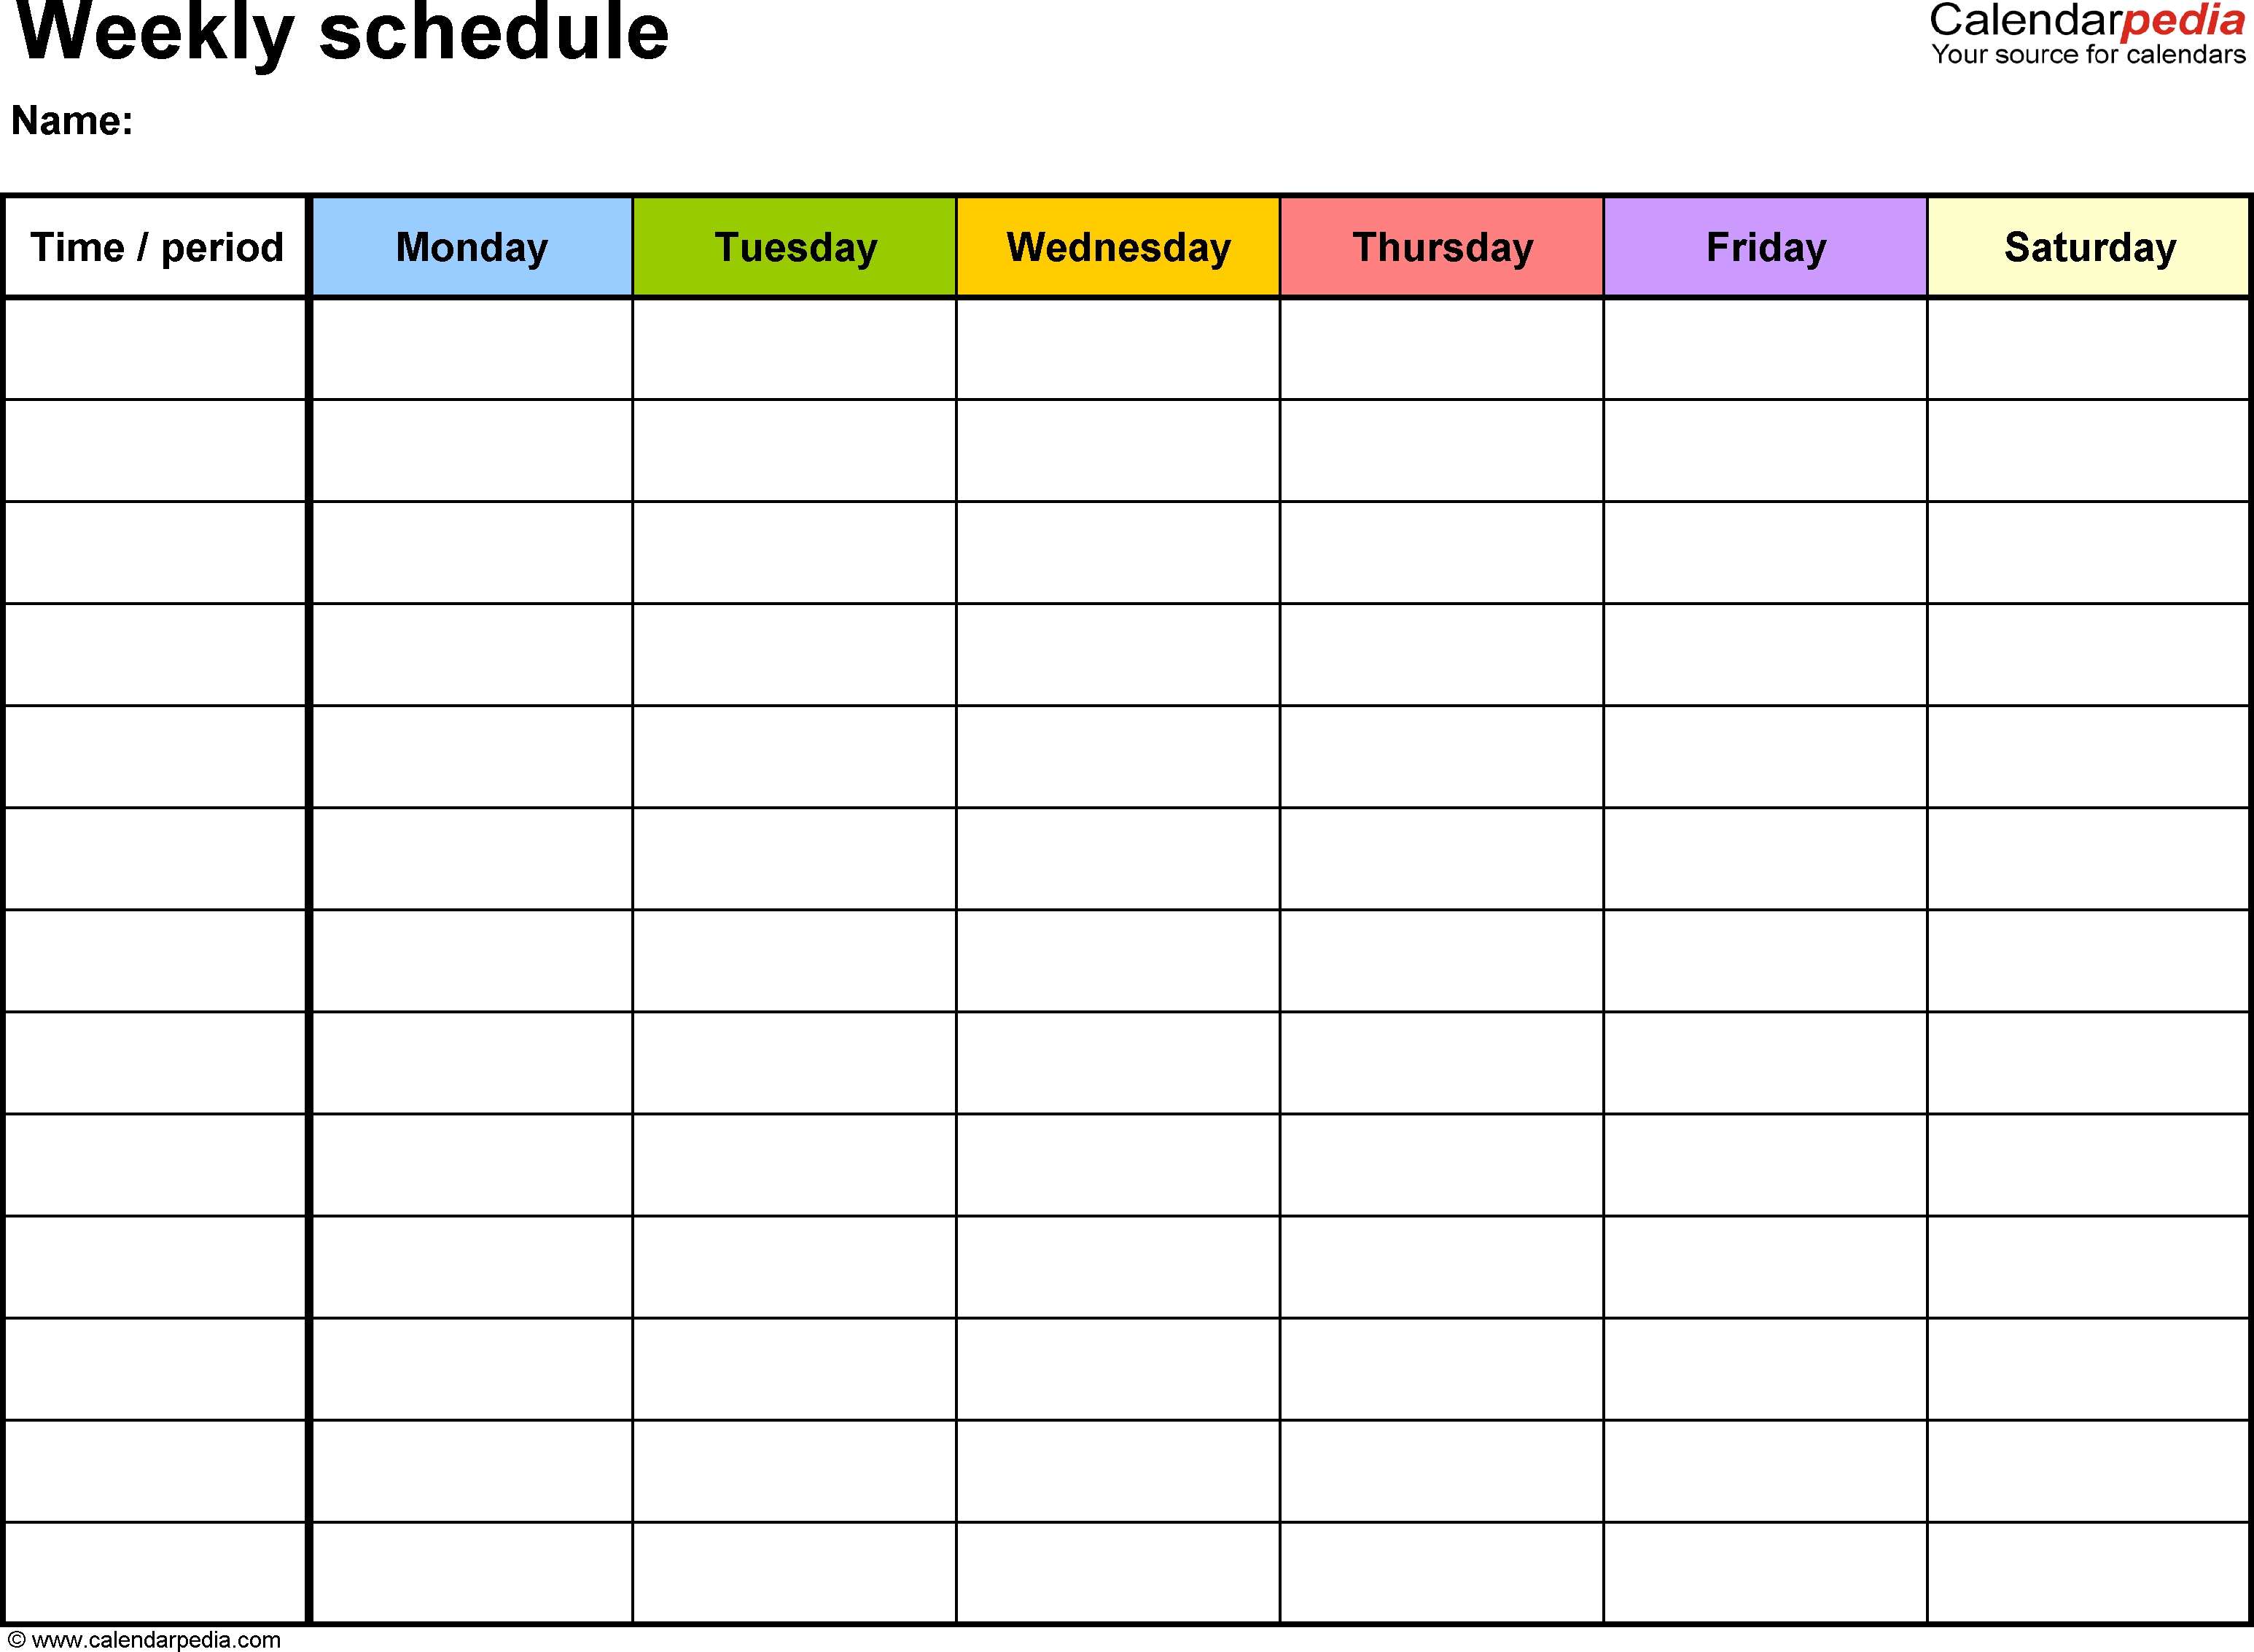 Free Weekly Schedule Templates For Word - 18 Templates  Blank Weekly Monday Through Friday Calendar Template